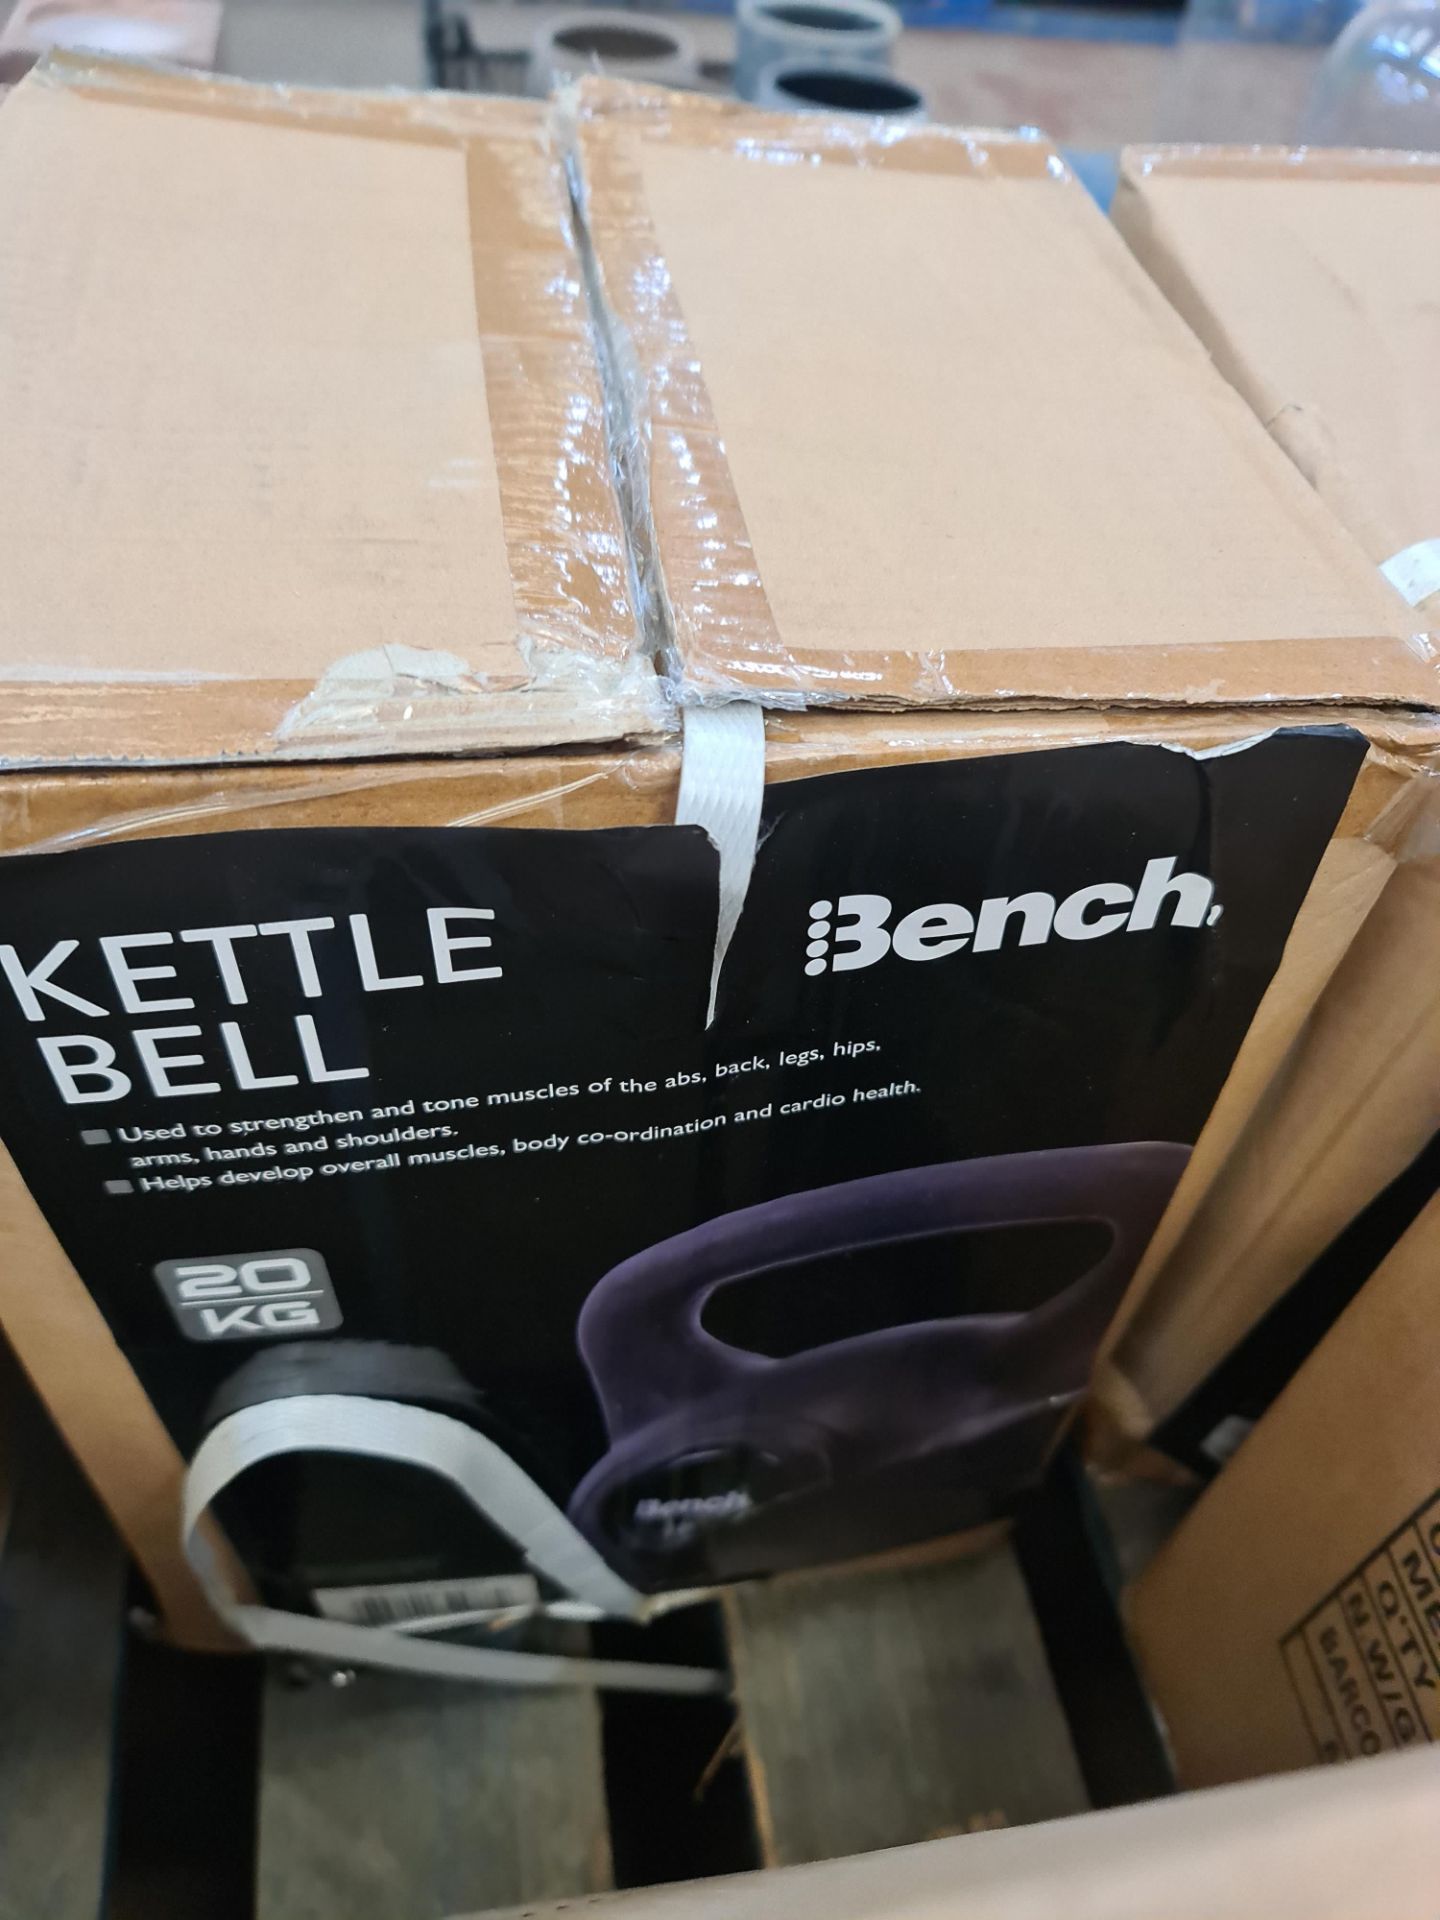 Set of 4 Bench kettle bells, individually boxed, sized 10kg, 12kg, 16kg and 20kg - Image 4 of 5